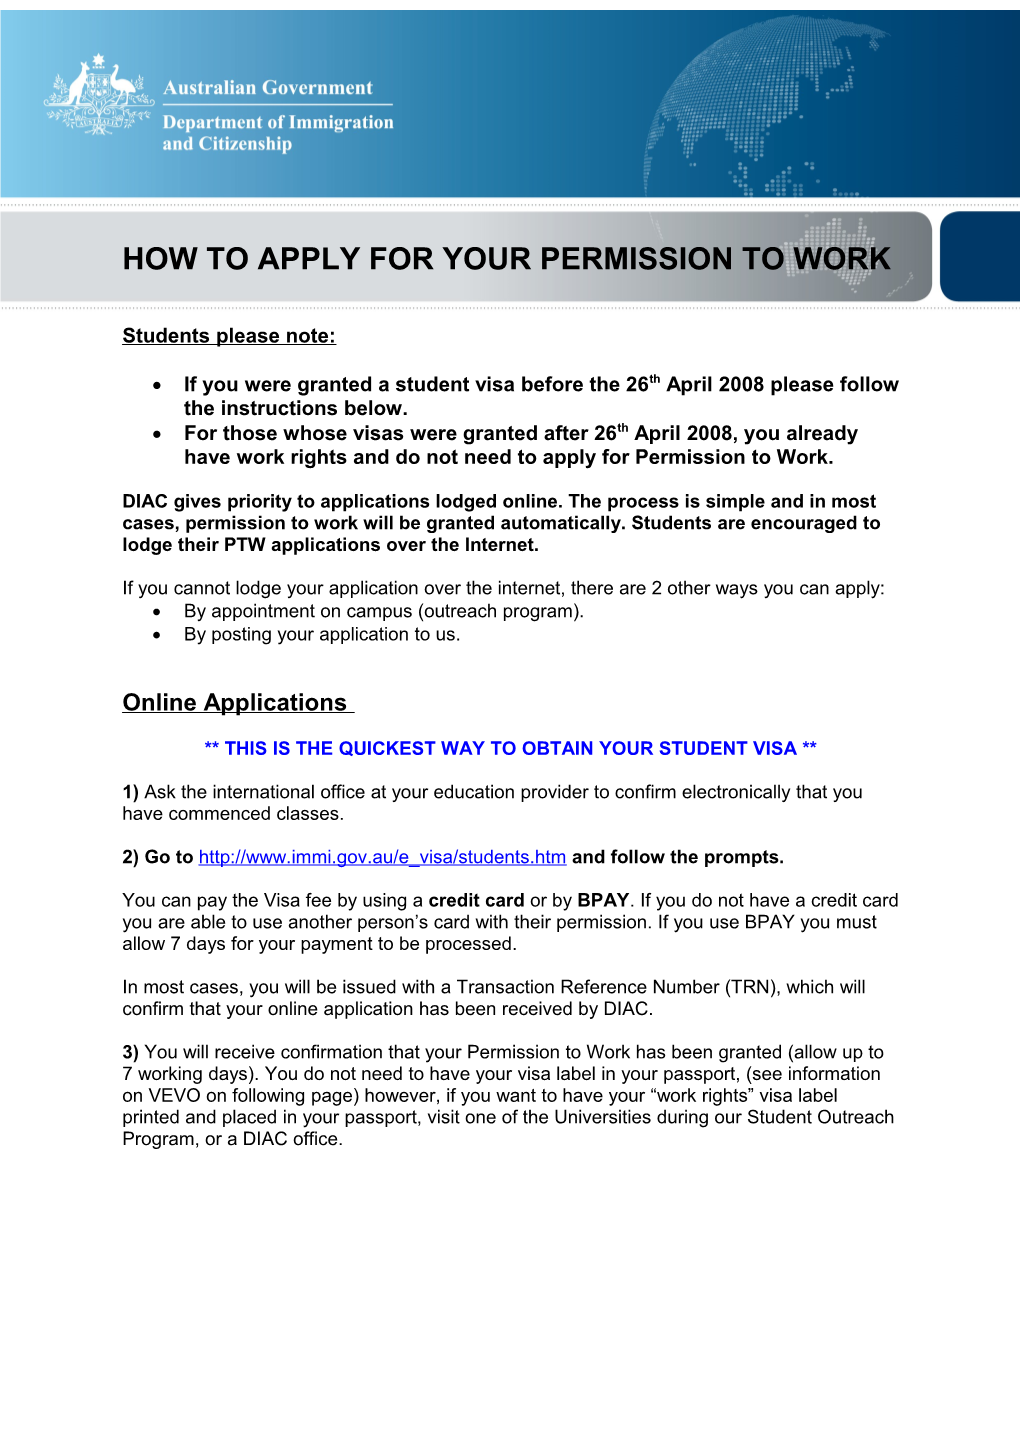 How to Apply for Your Permission to Work